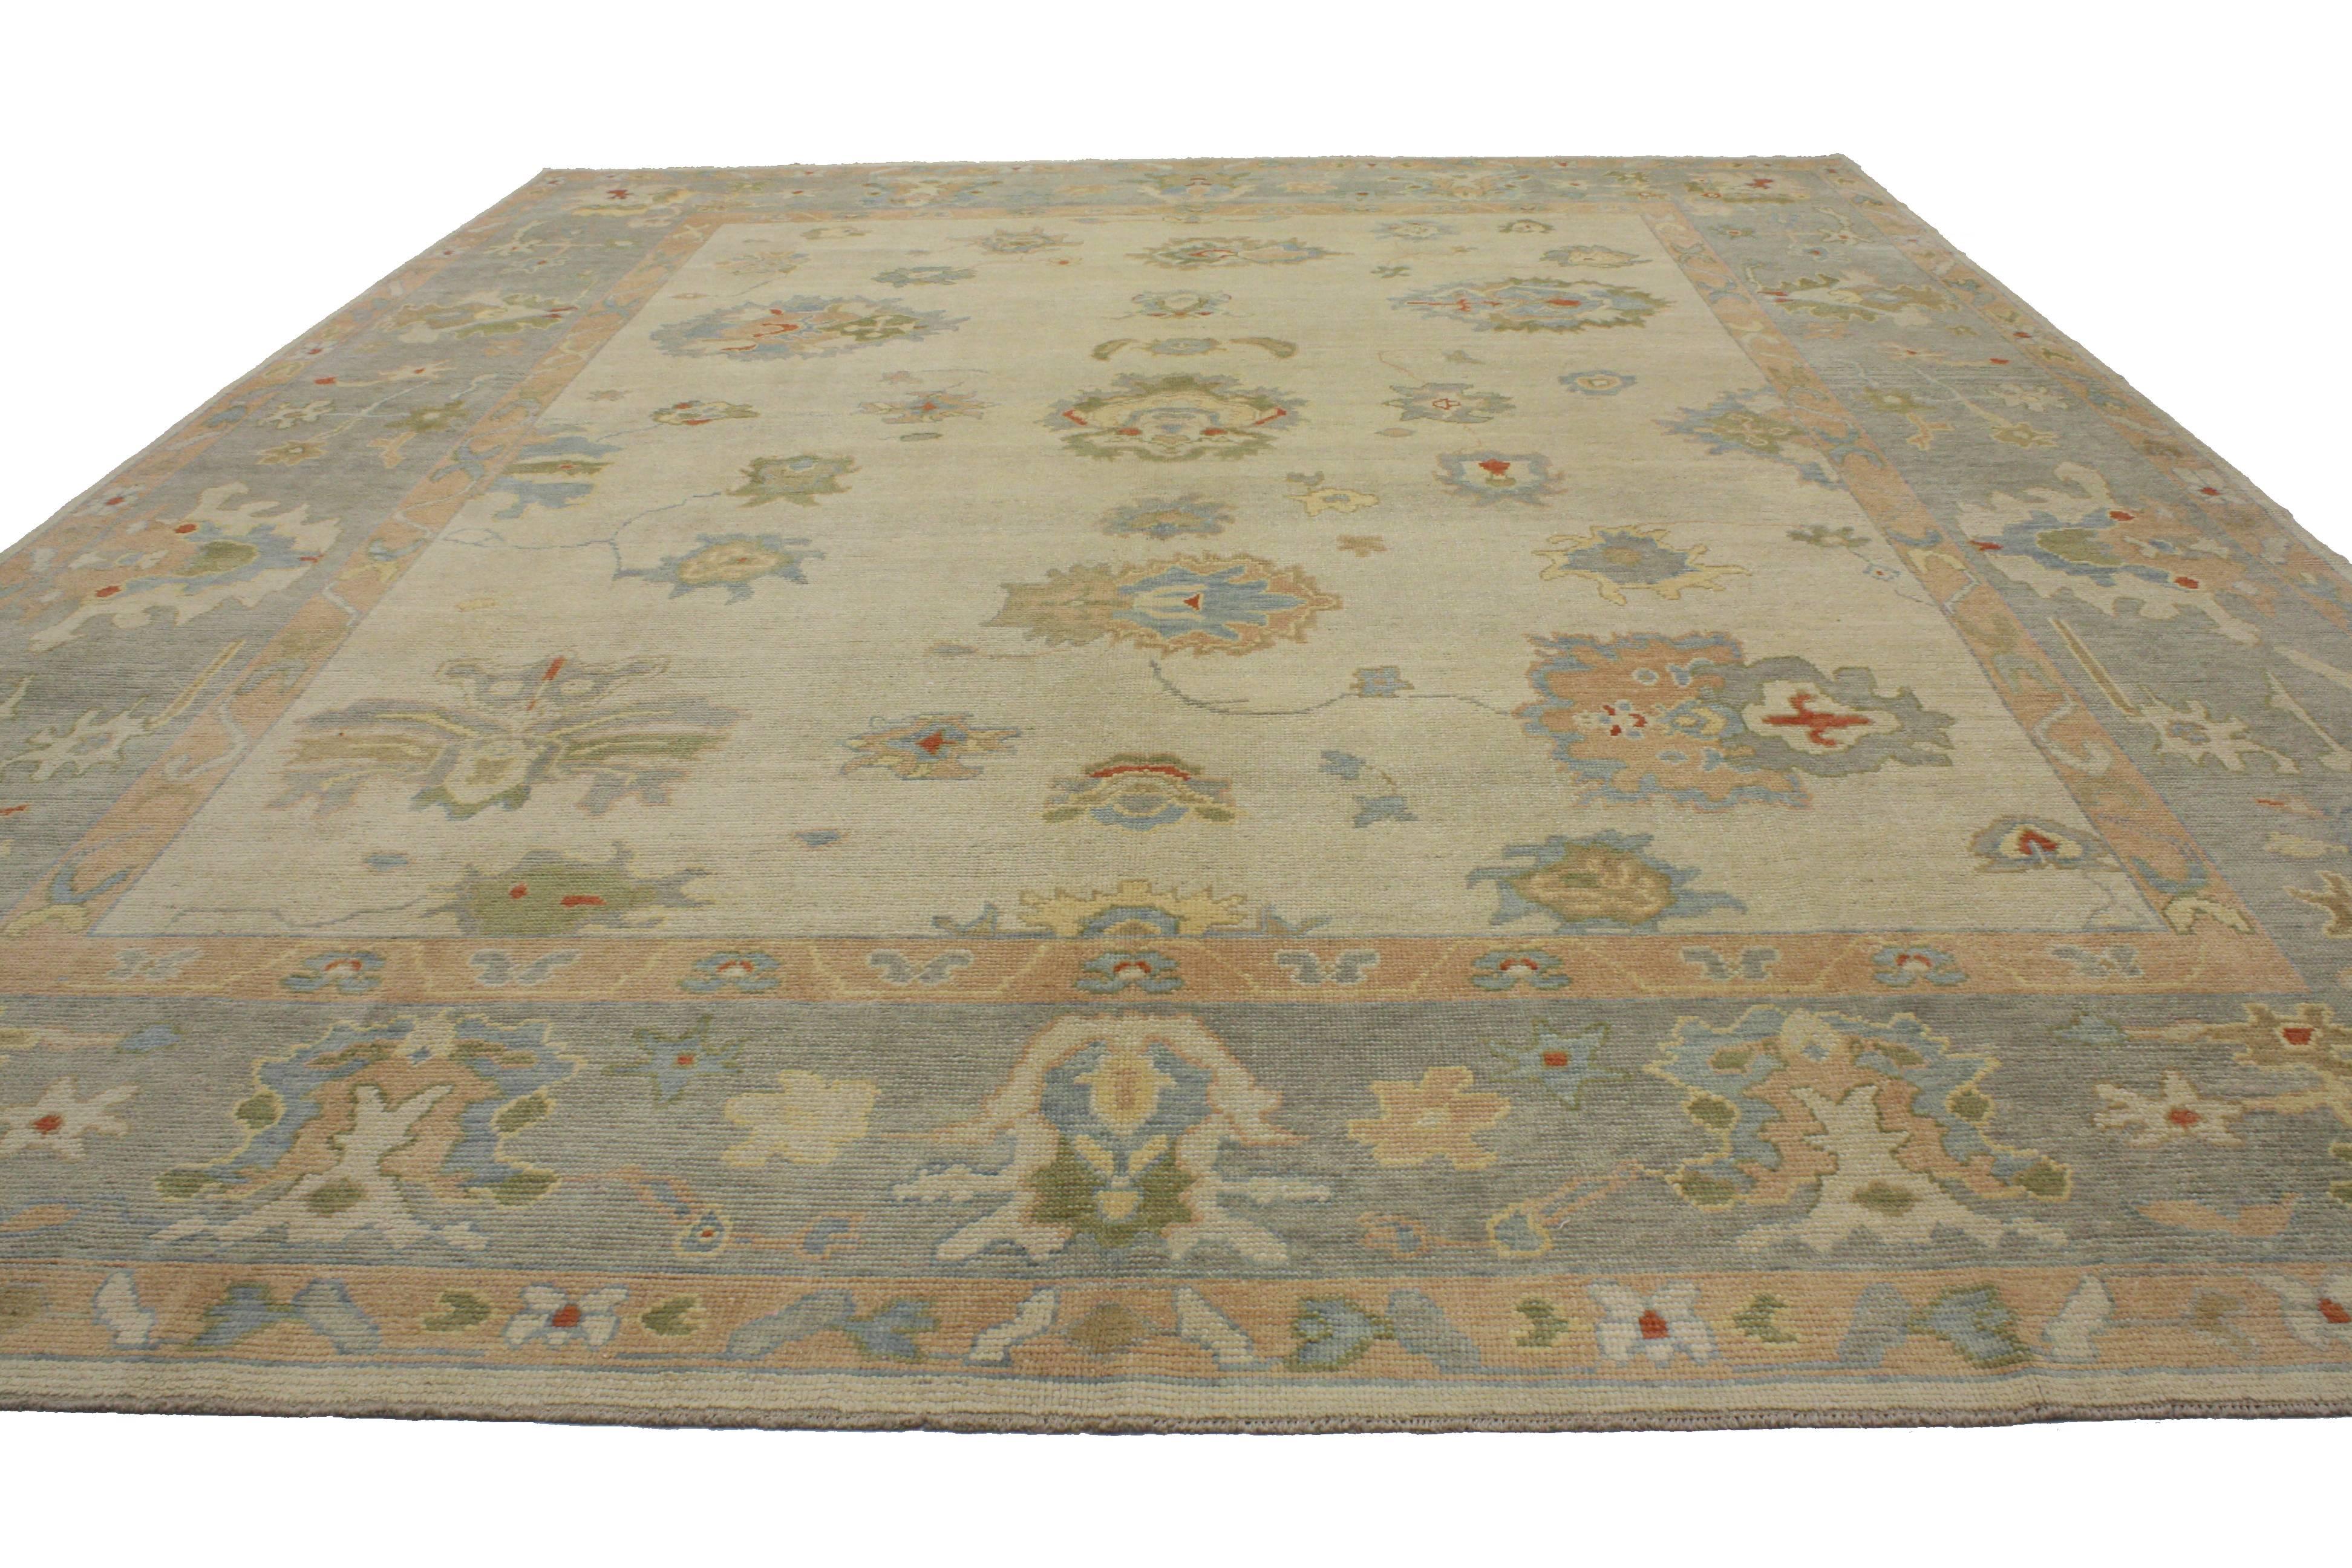 51605 New Contemporary Turkish Oushak Area Rug with French Provincial Style. From climbing roses and topiaries to toile and tea, this Turkish Oushak rug can go cozy casual chic or chateau manor formal with its transitional style and soft pastel